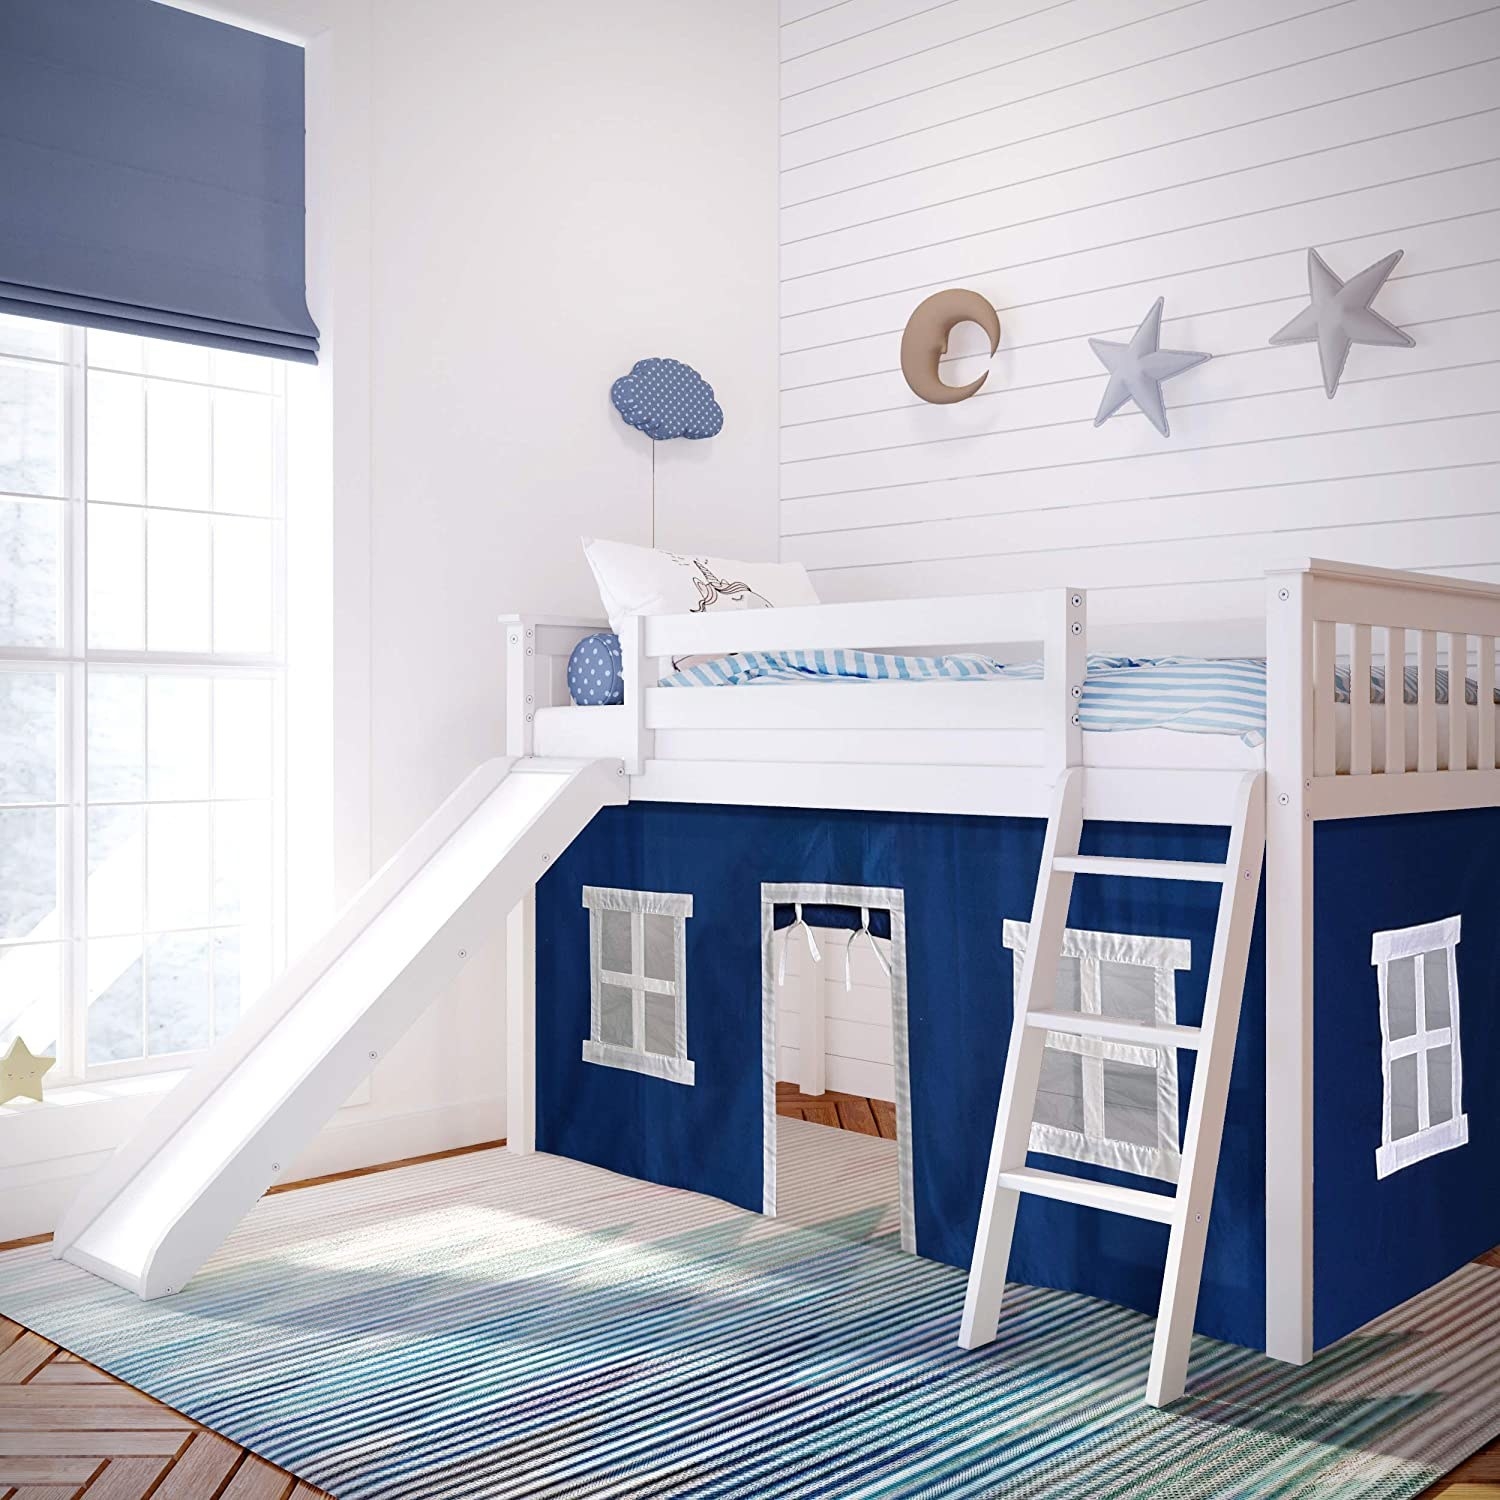 one bunk bed with ladder, slide and fabric playhouse on bottom